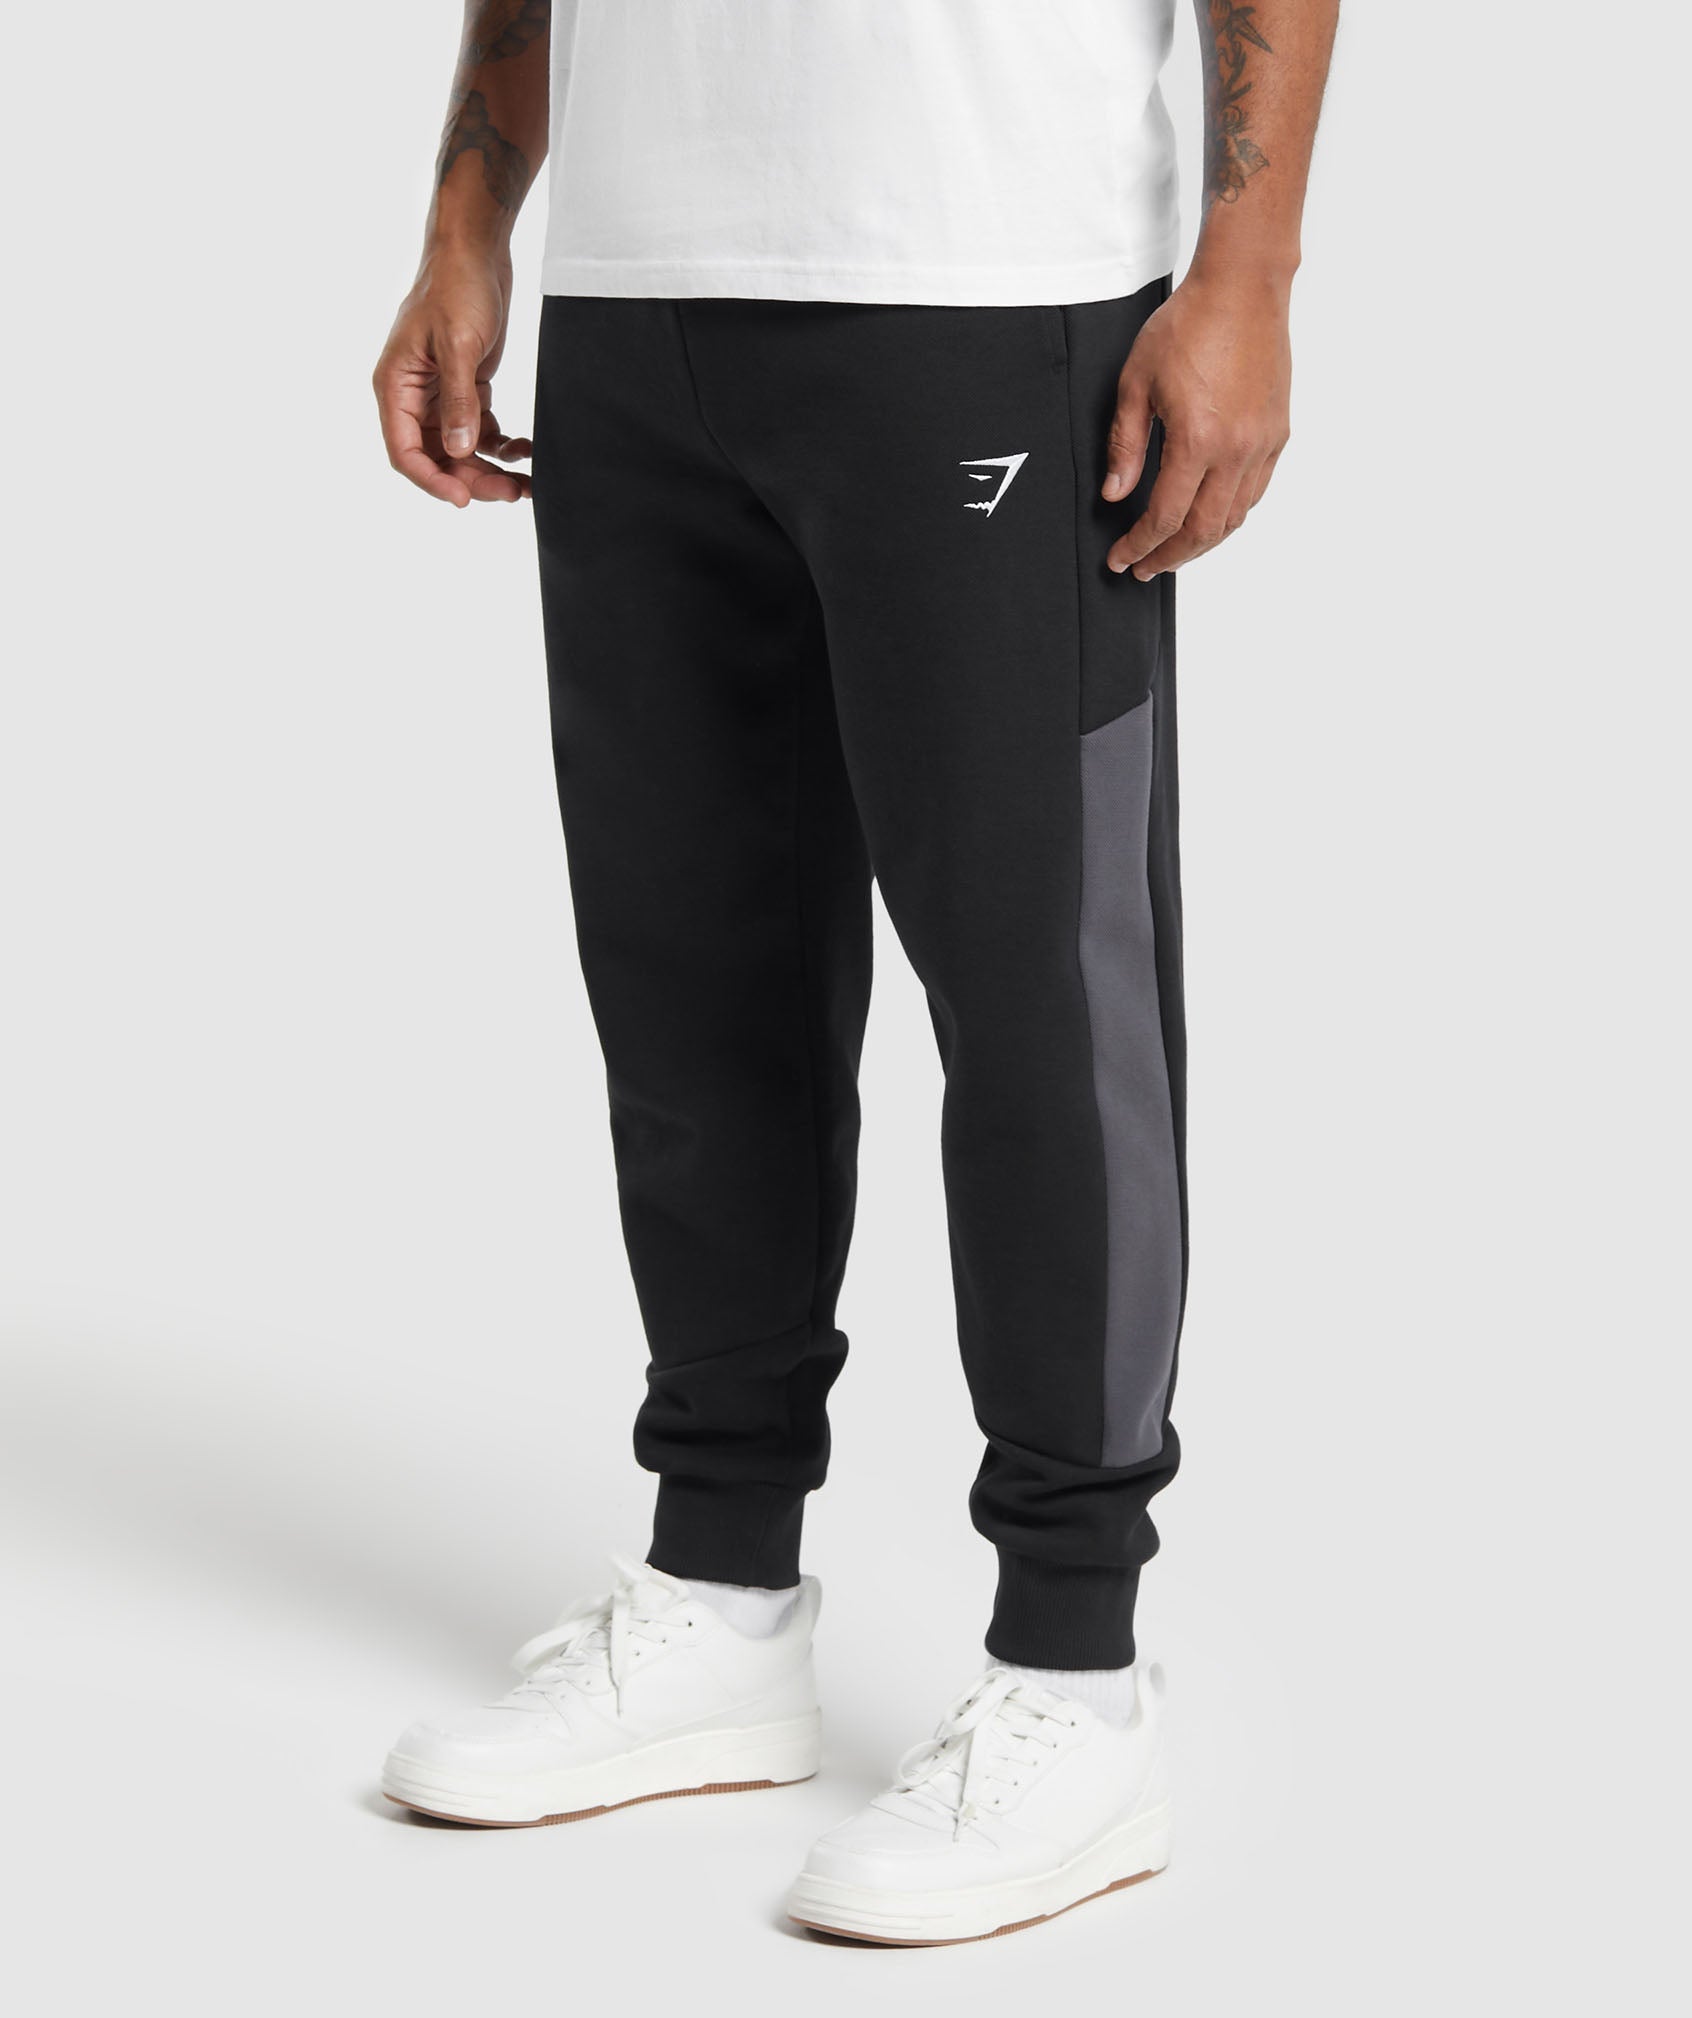 Pique Joggers in Black/Onyx Grey - view 3